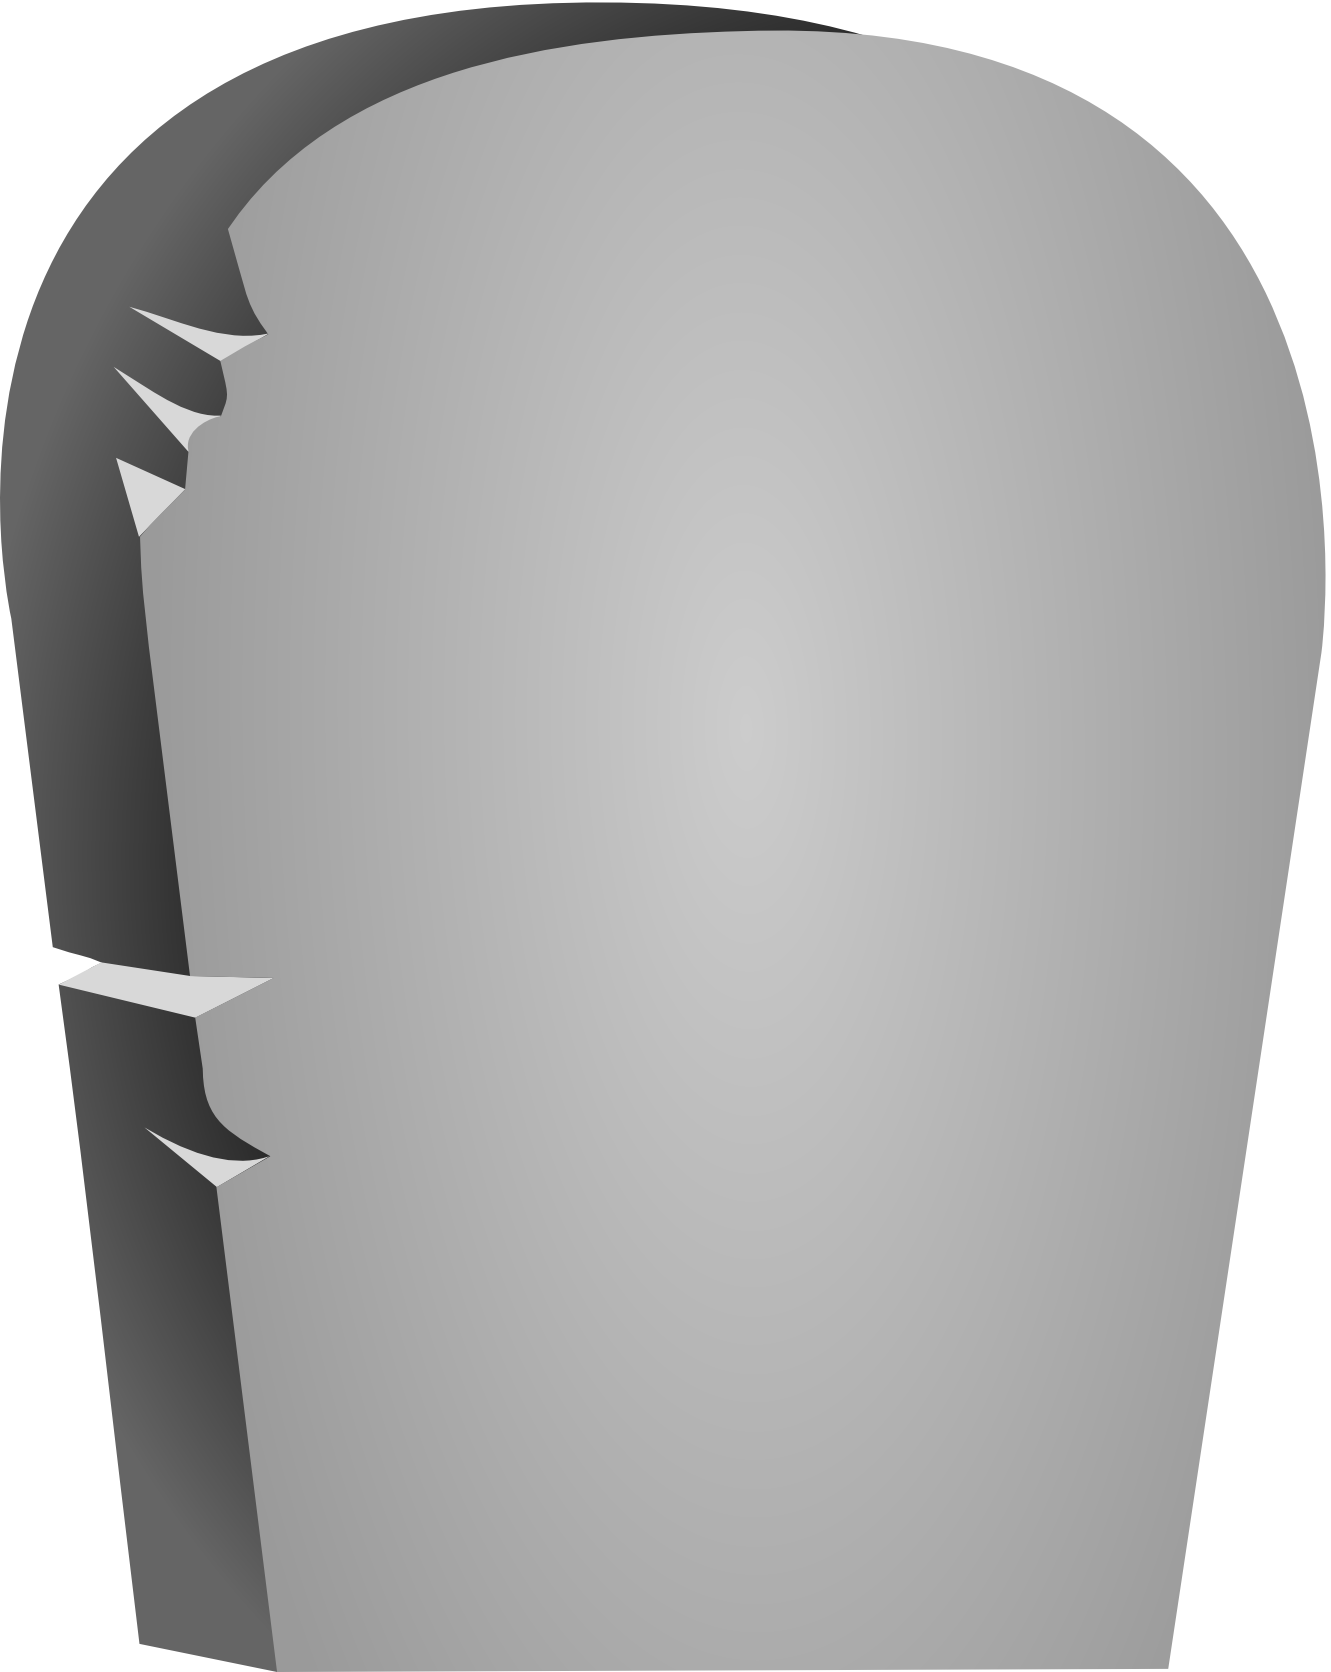 Tombstone Clipart Free